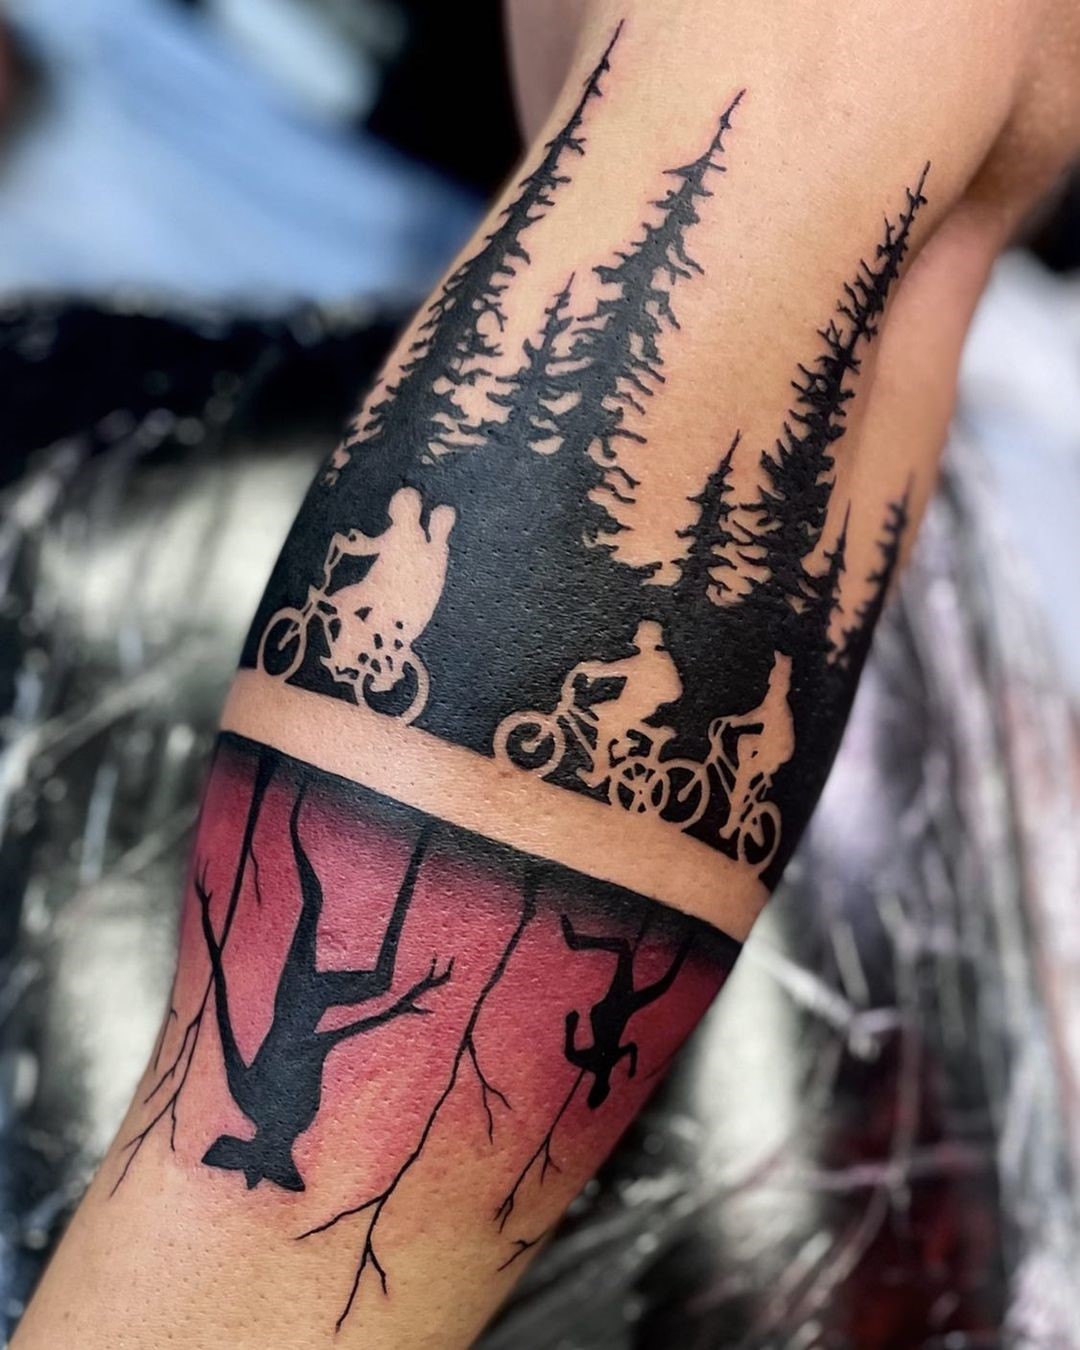 30+ Outstanding Forest Tattoo Design Ideas 2023 (Black & White, Colorful) - Saved Tattoo